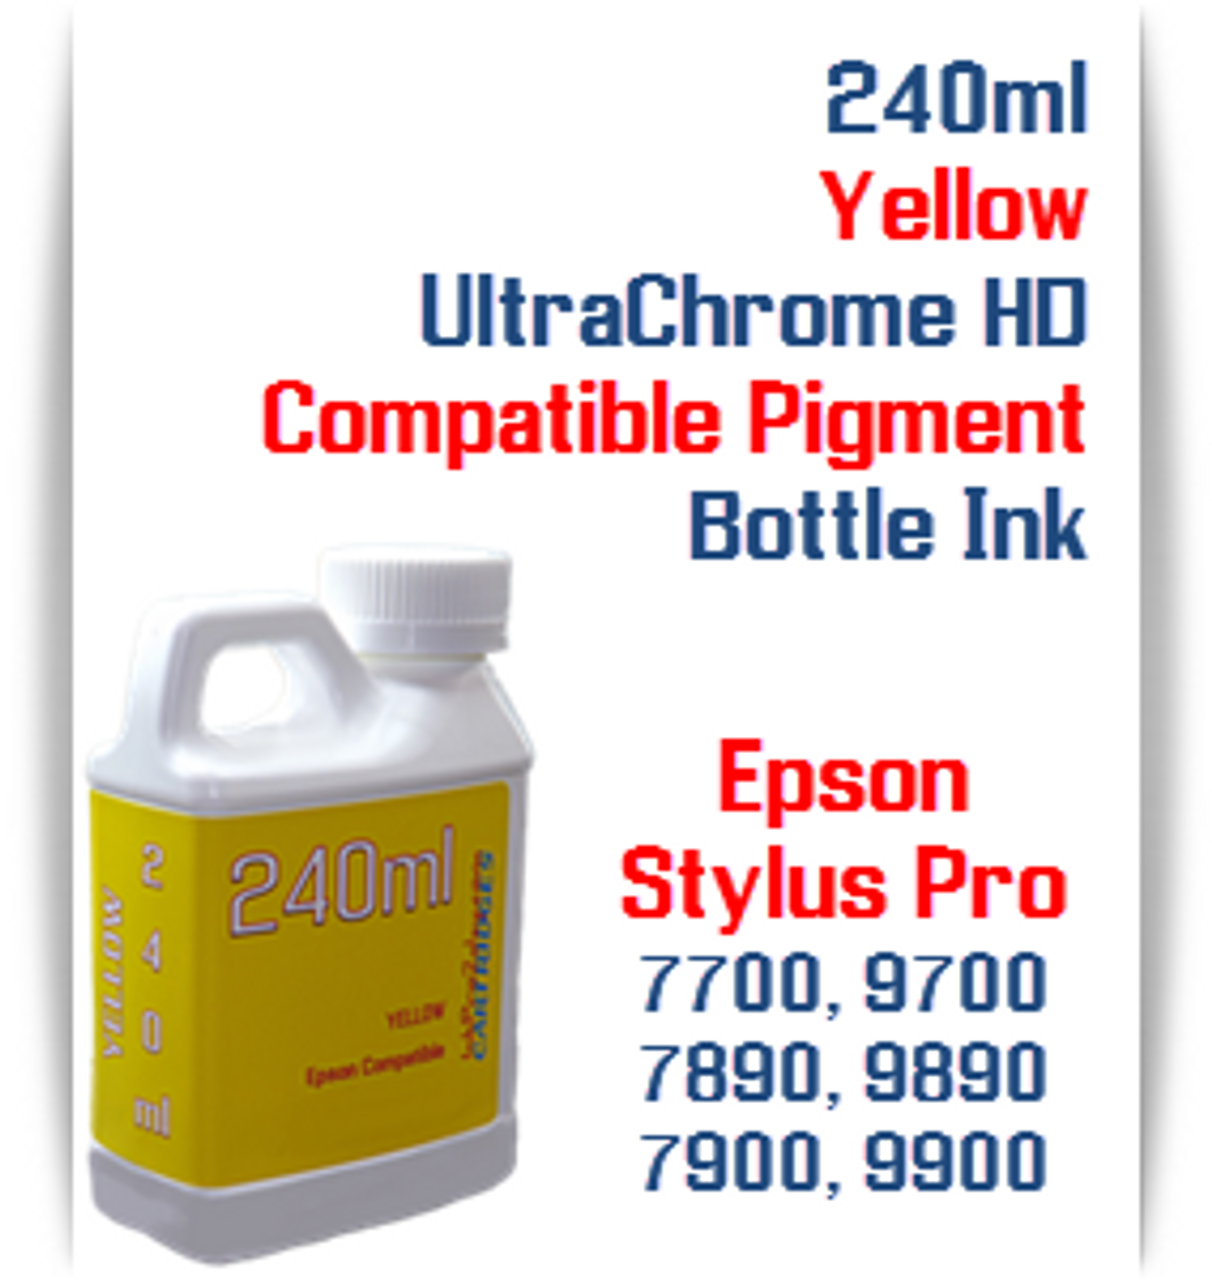 Yellow 240ml Bottle Compatible UltraChrome HDR Pigment Ink Epson Stylus Pro 4900, 7700, 9700, 7890, 9890, 7900, 9900 Printers